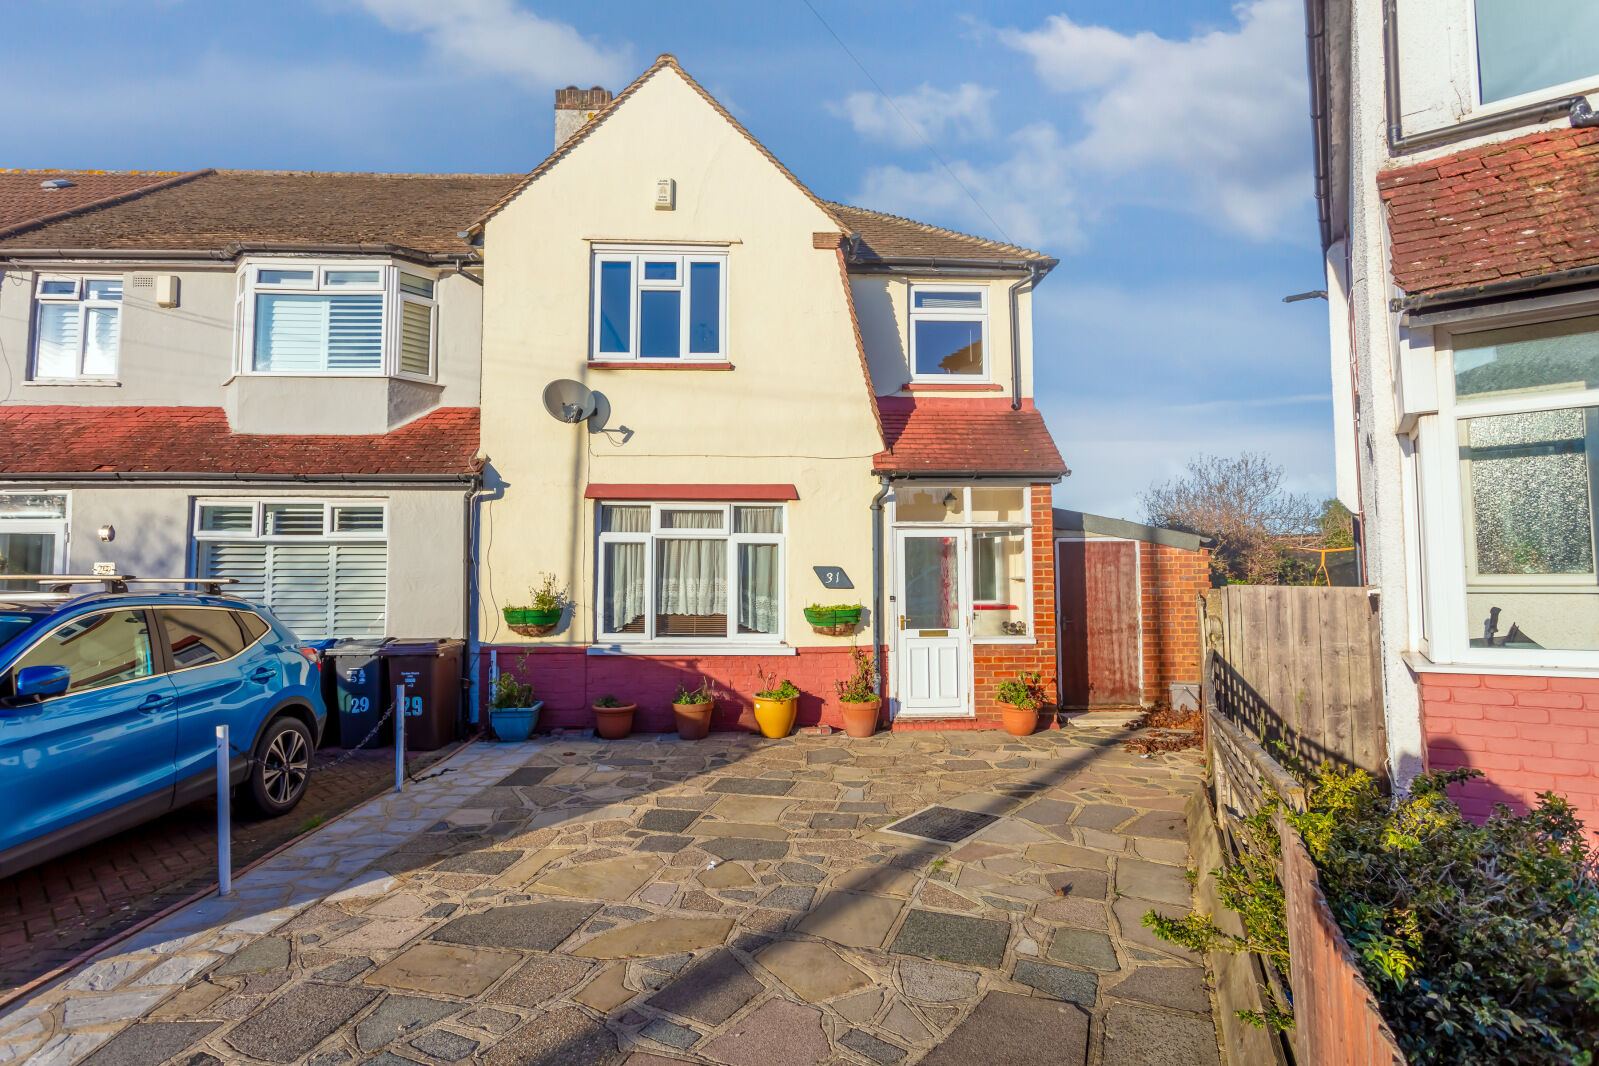 3 bedroom end terraced house for sale Franklin Crescent, Mitcham, CR4, main image